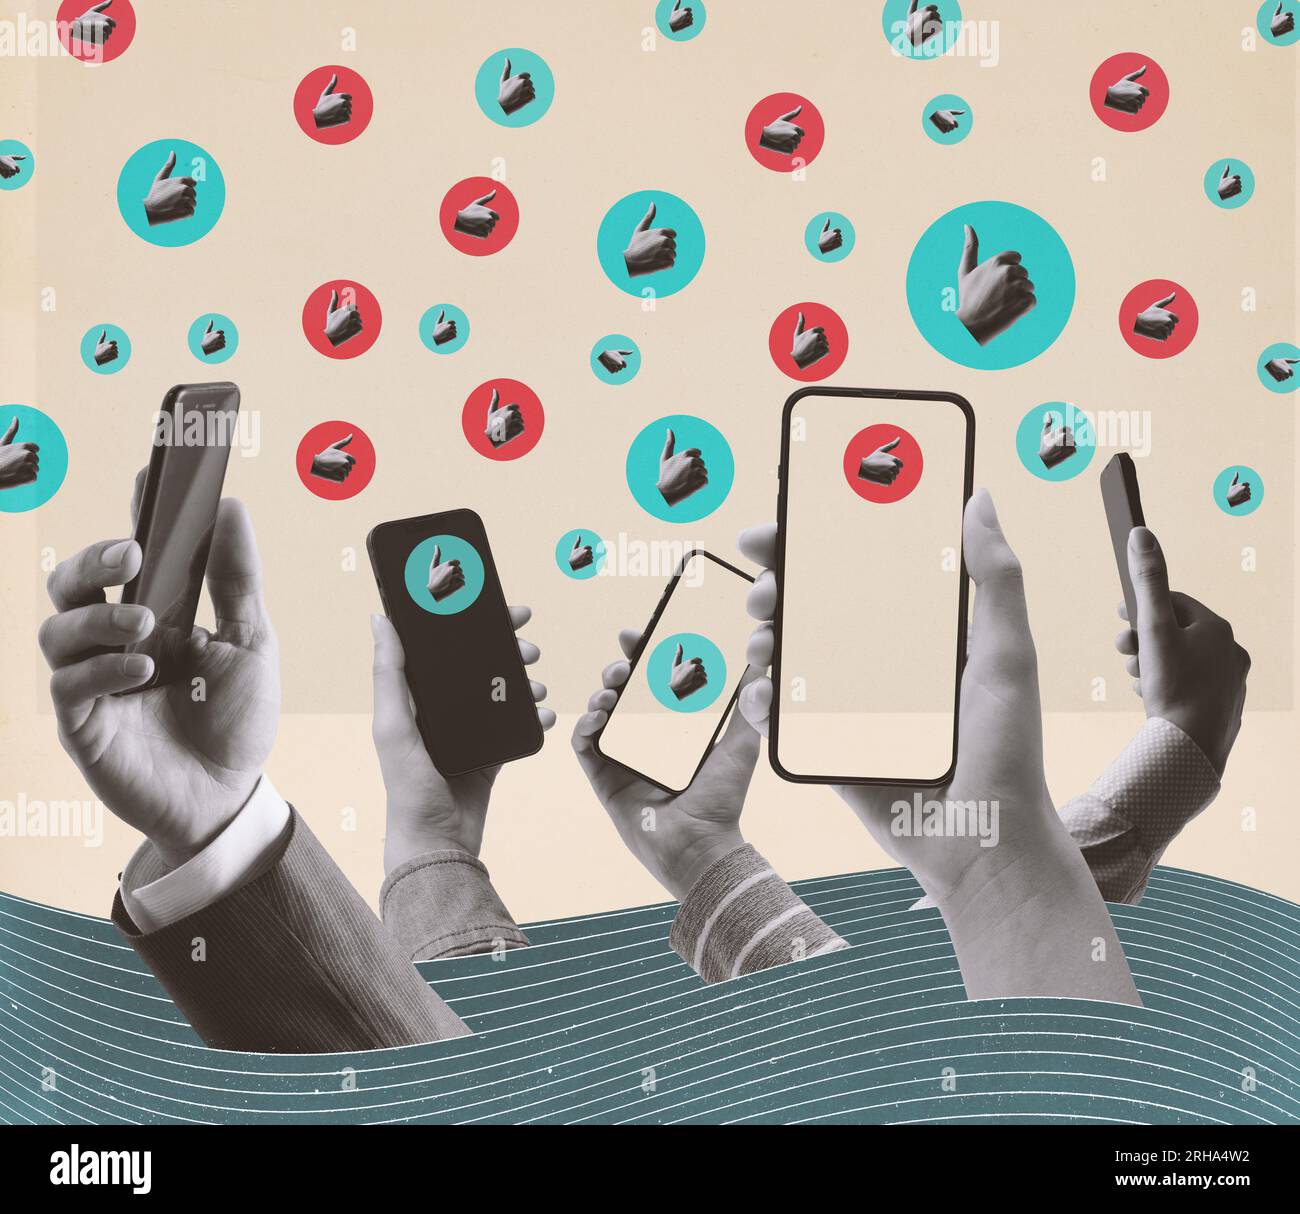 Many social media users connecting online: hands holding smartphones and thumbs up likes, vintage collage design Stock Photo